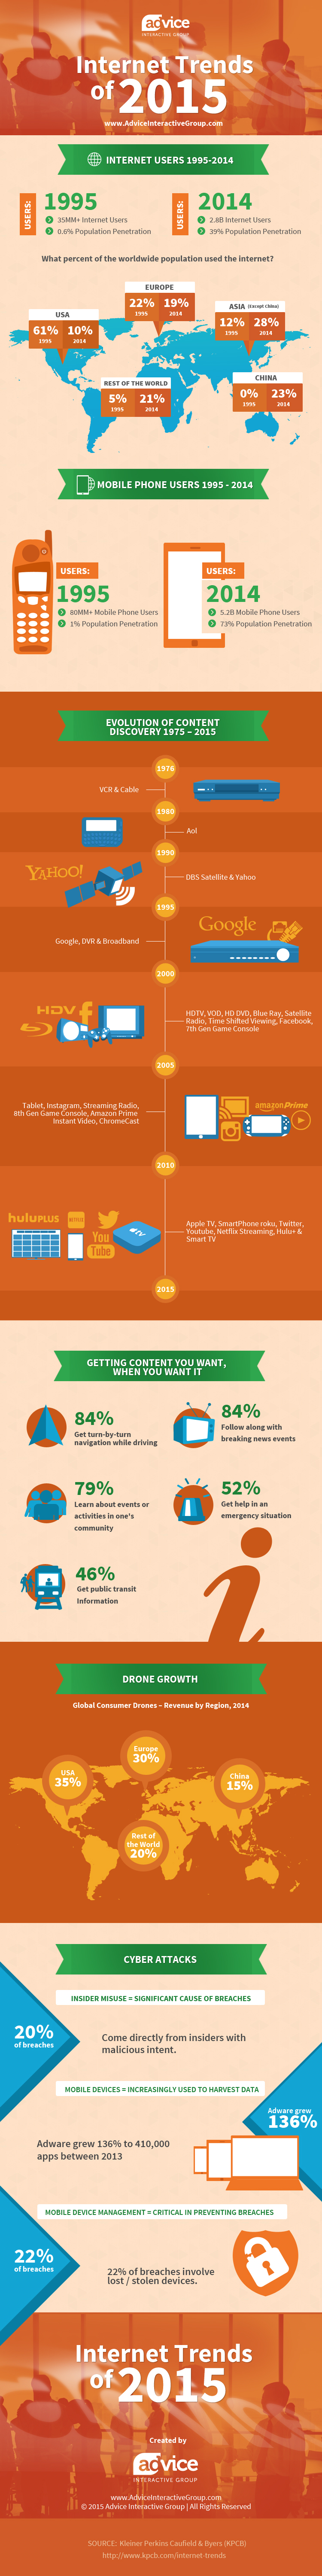 Internet Trends of 2015 Infographic